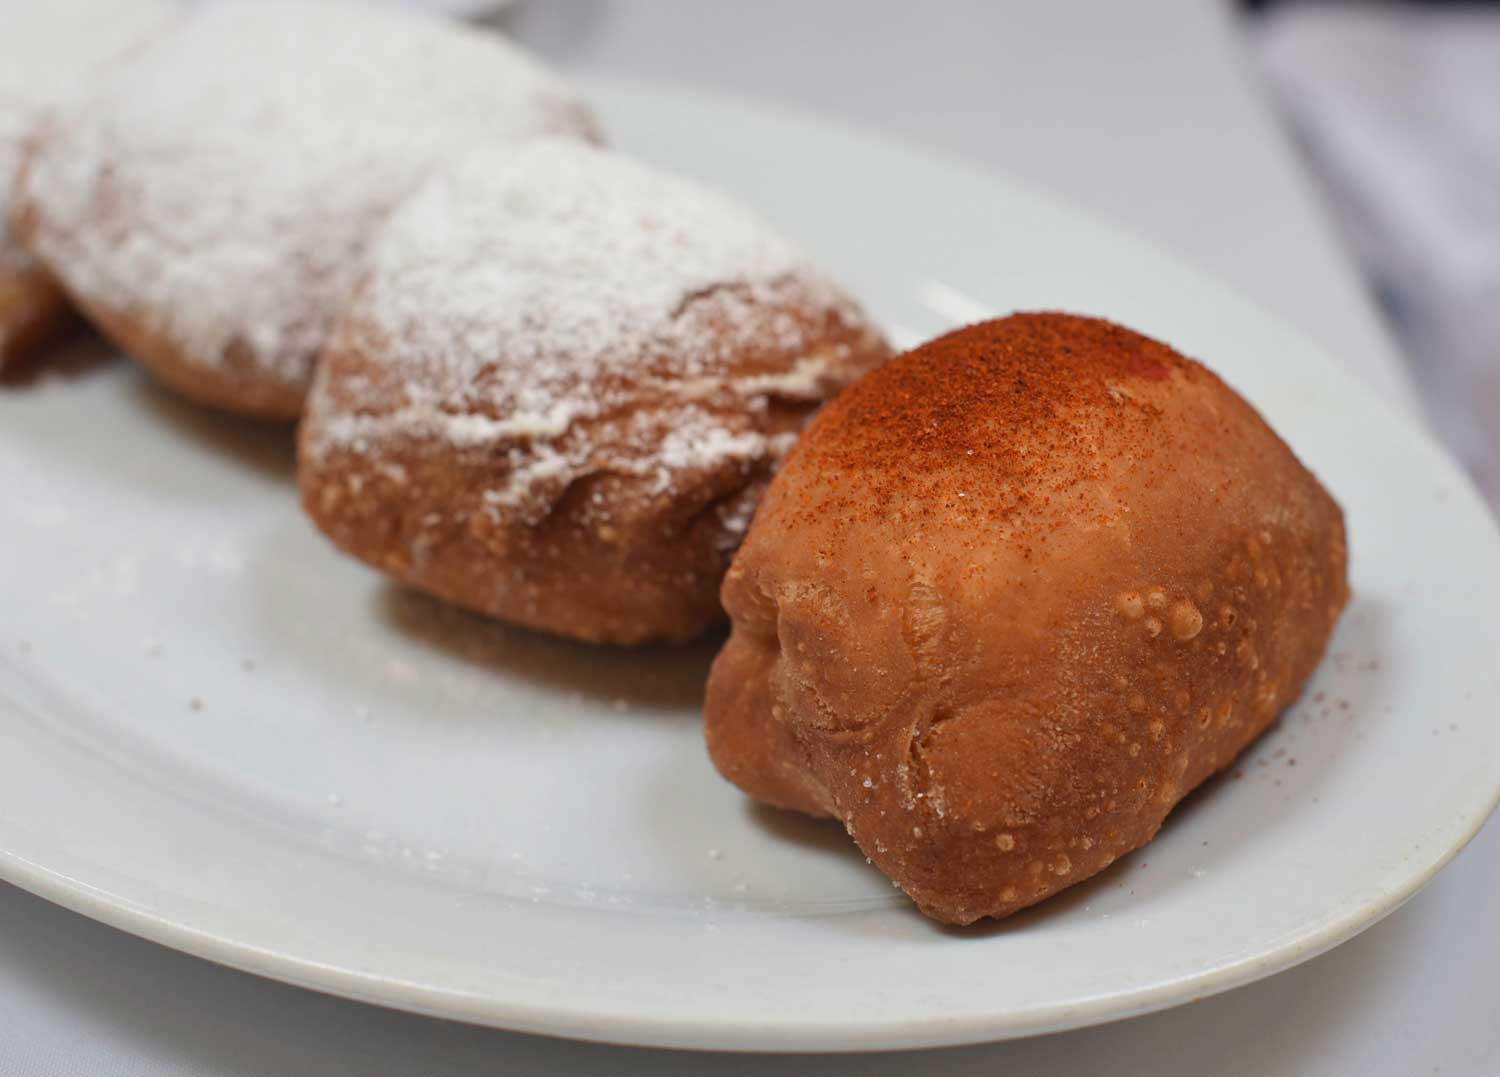 The beignets at Brenda's are something special